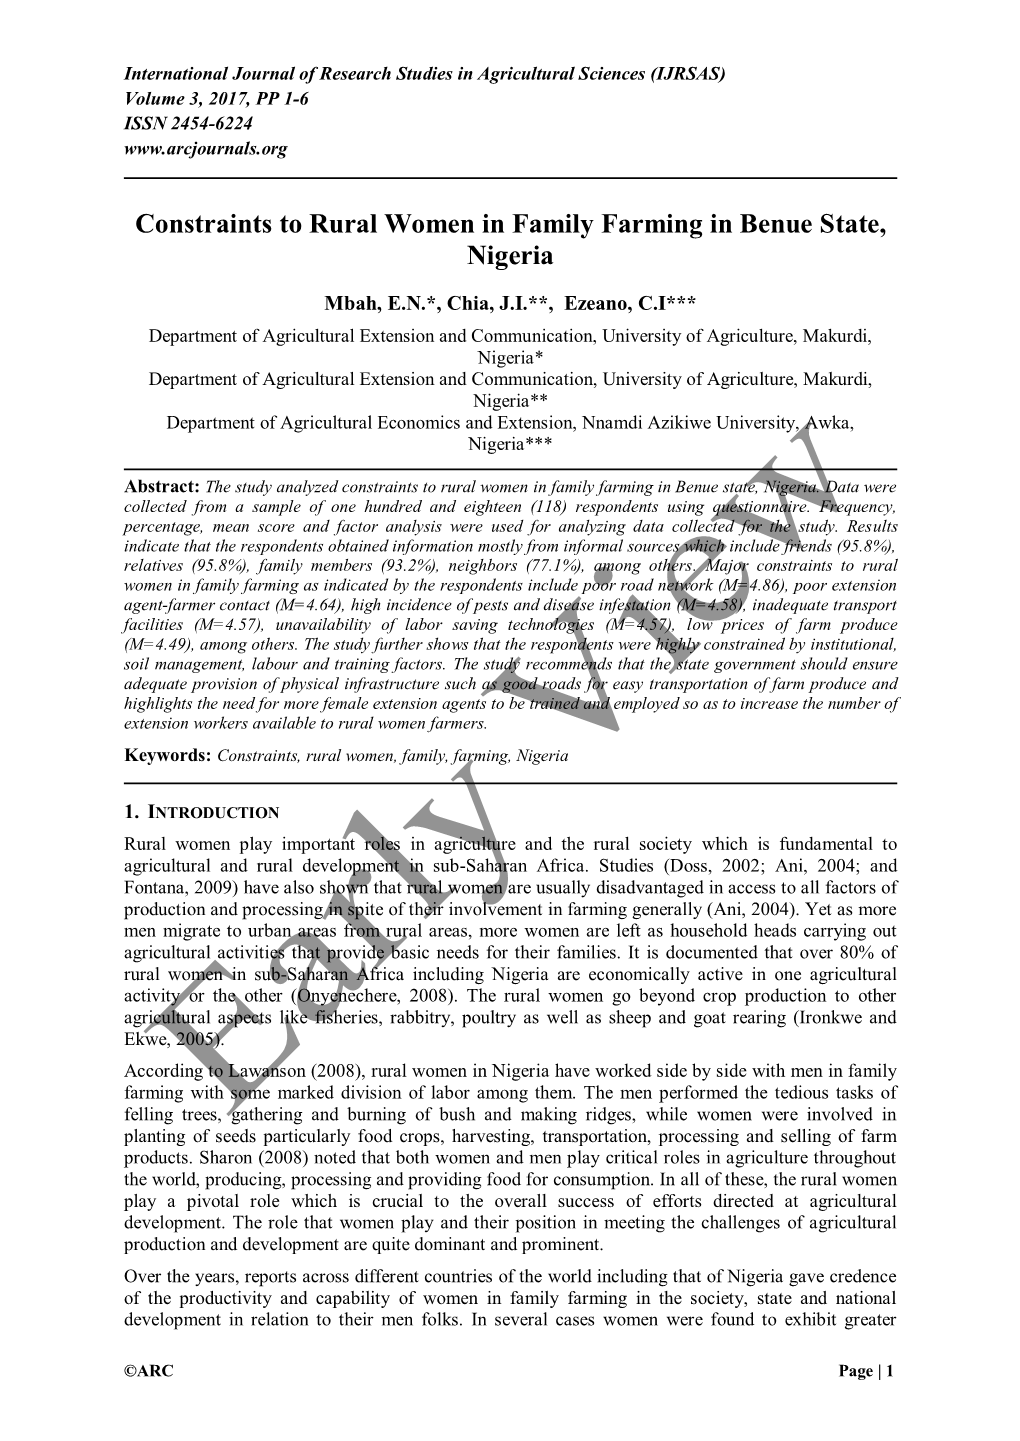 Constraints to Rural Women in Family Farming in Benue State, Nigeria